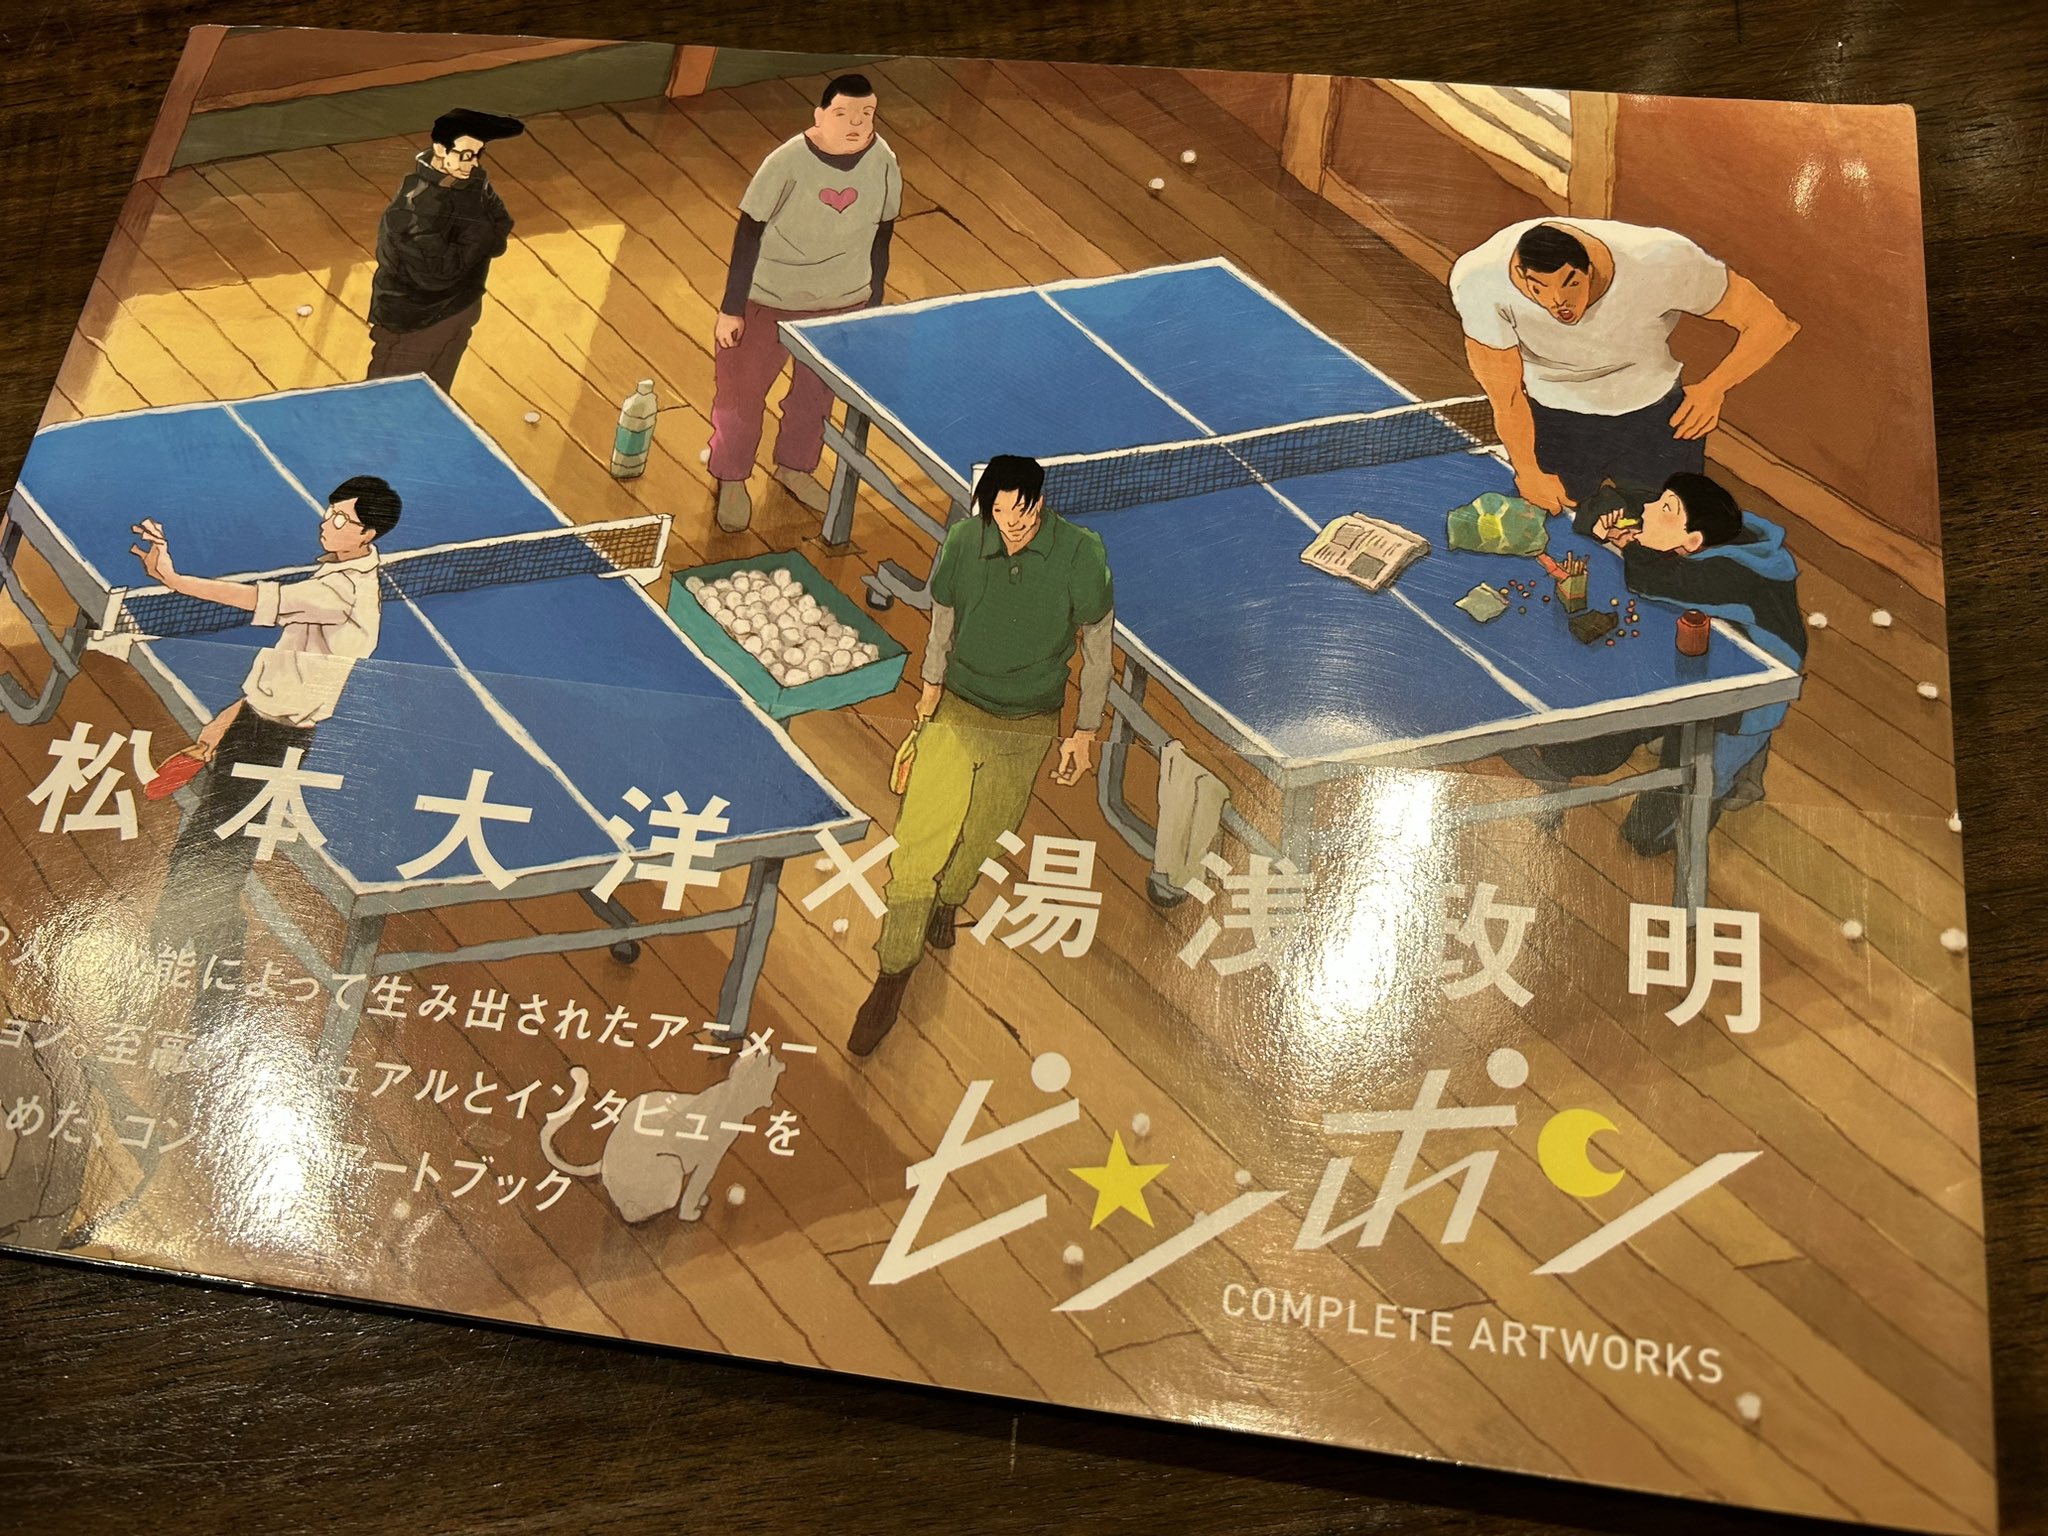 Ping Pong Anime Complete Artworks Book Review